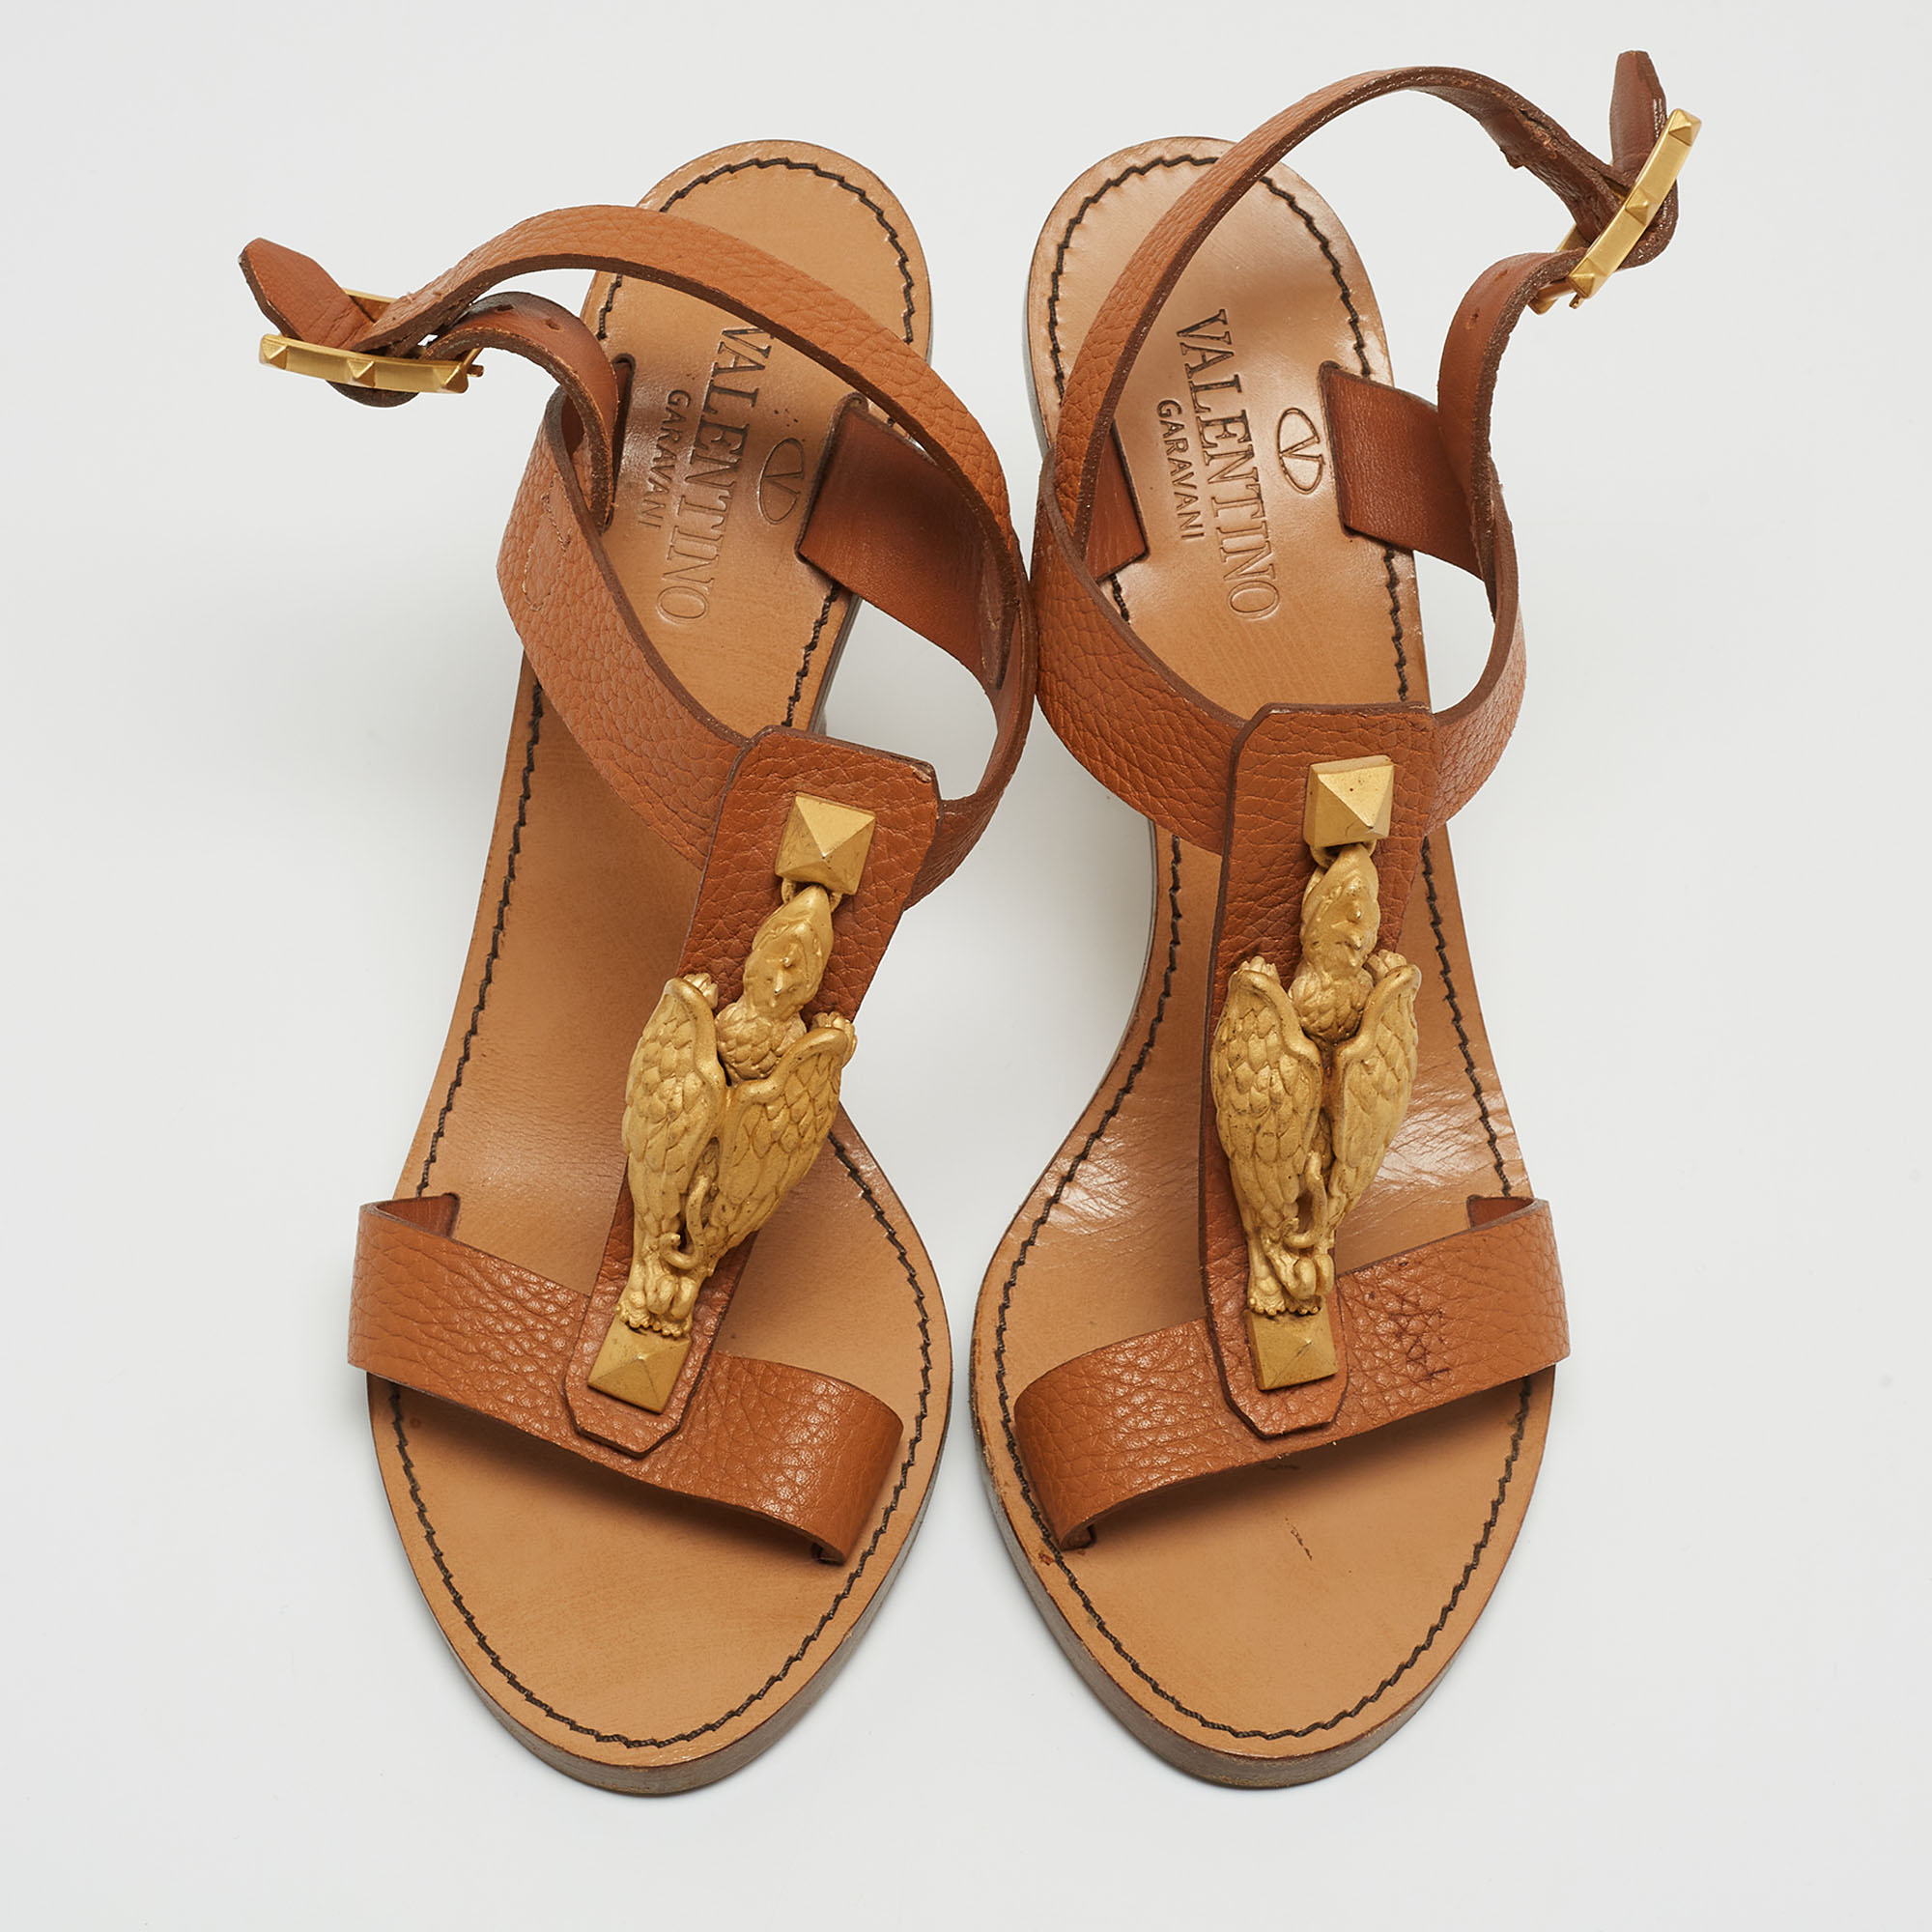 Valentino Brown Leather T-strap Slingback Sandals Size 38